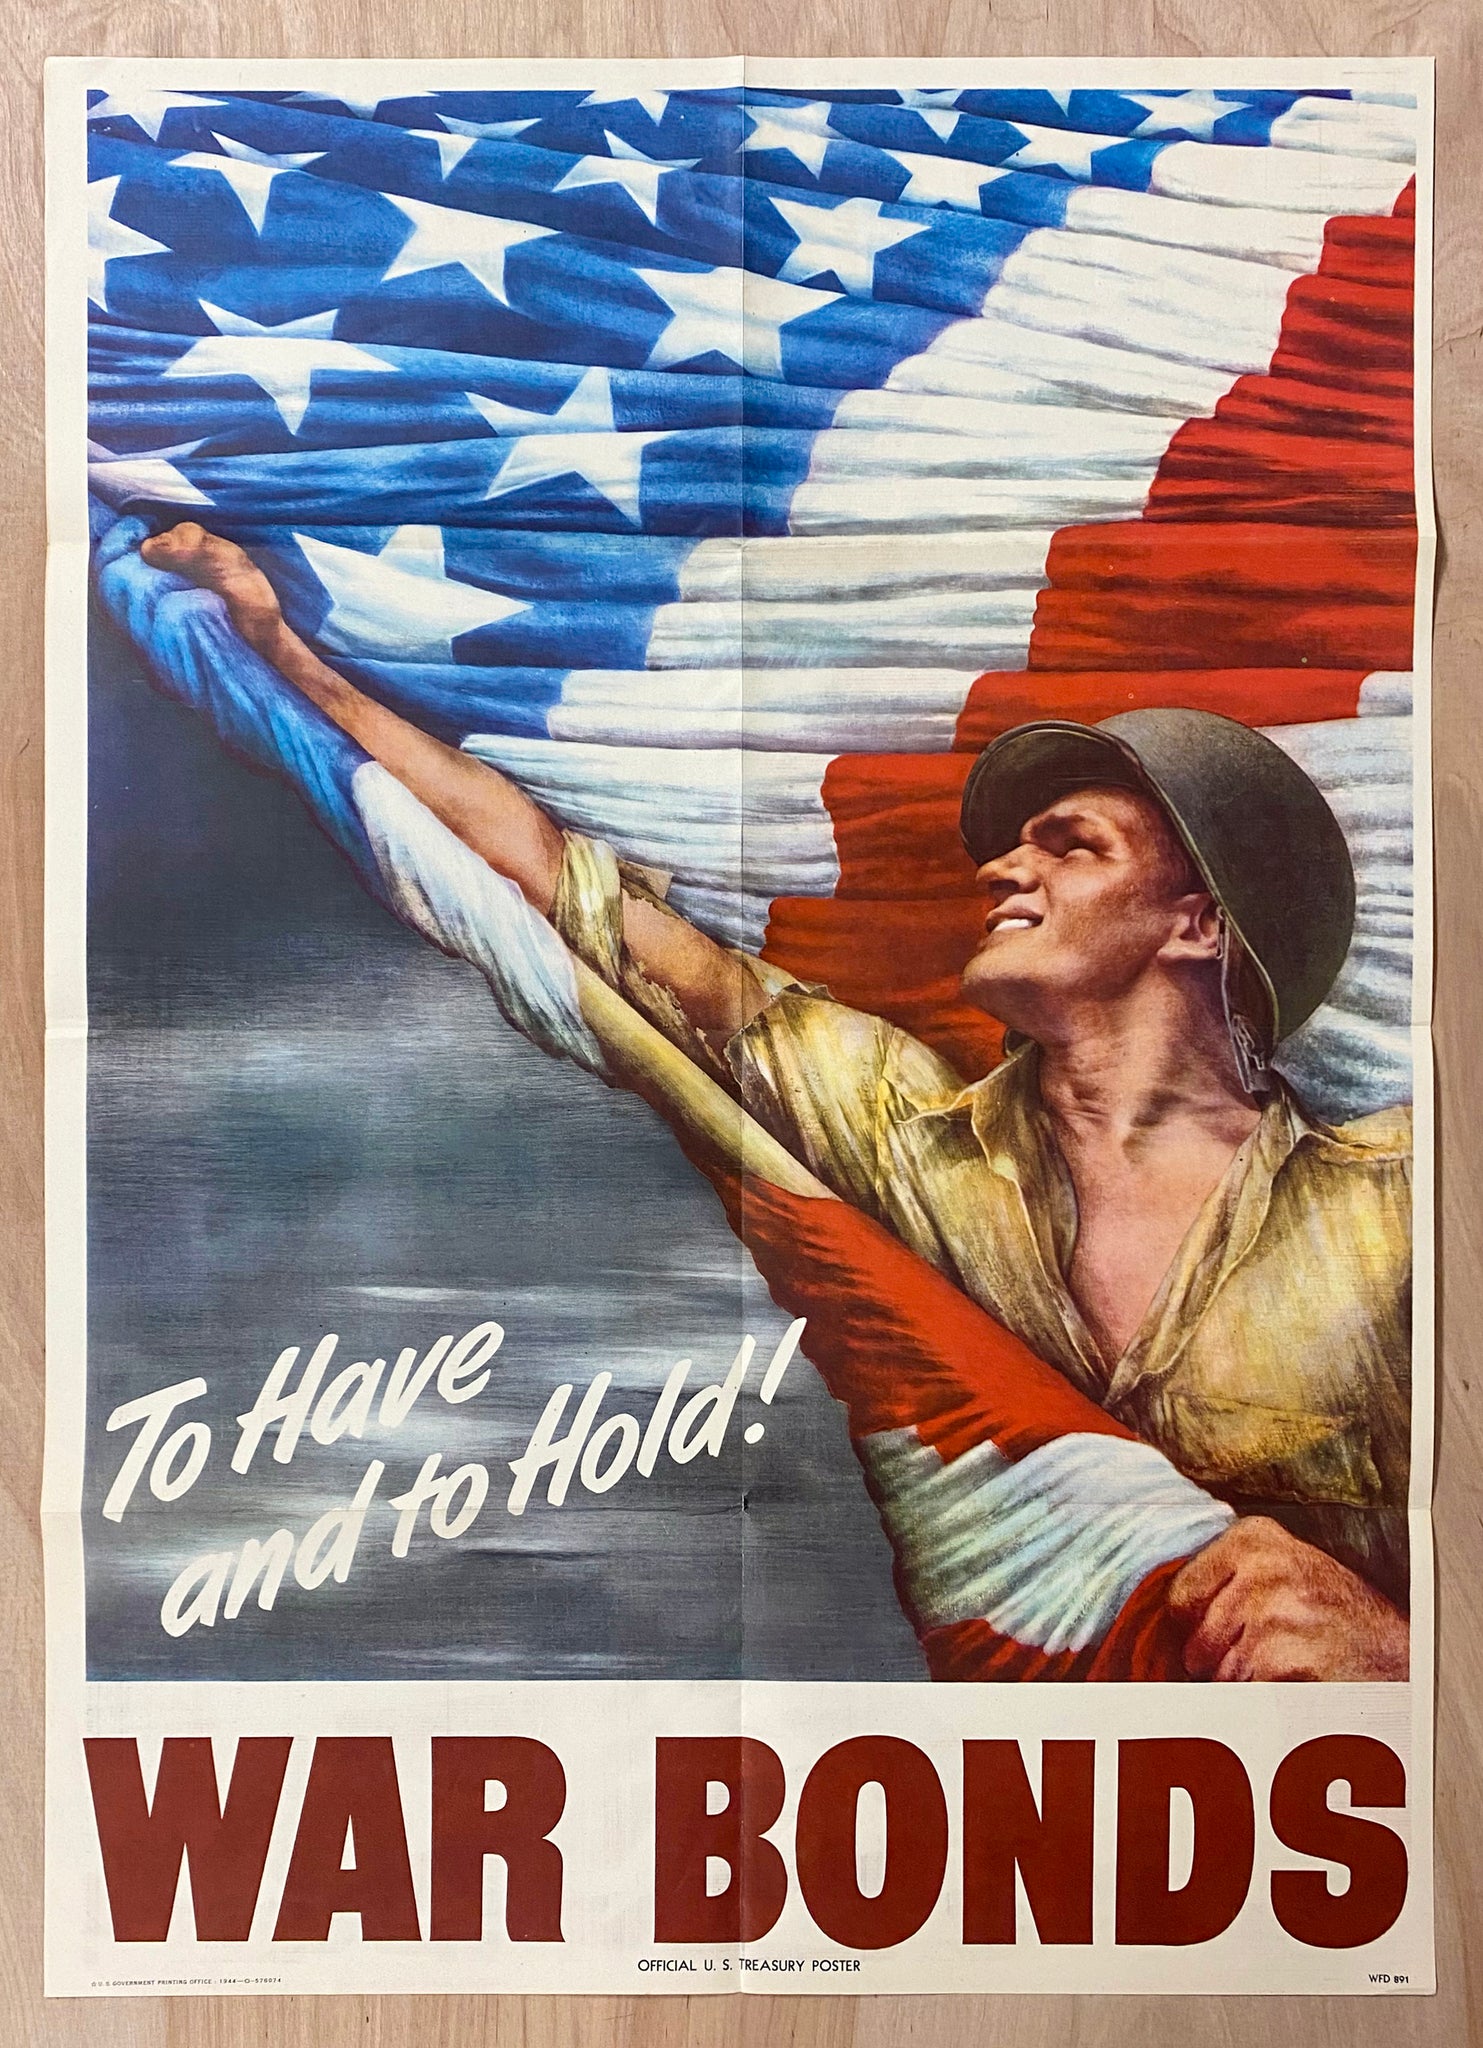 1944 To Have And To Hold War Bonds US Treasury Vic Guinnell WWII